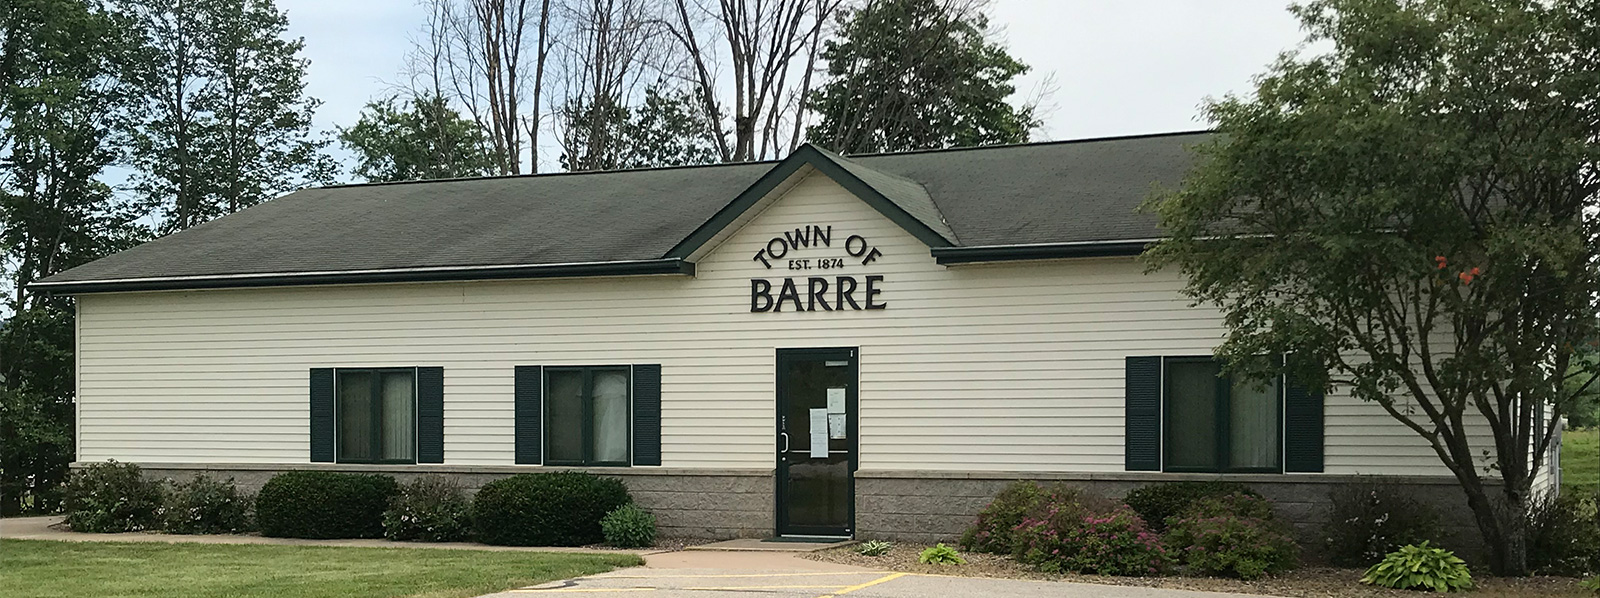 Welcome to the Town of Barre